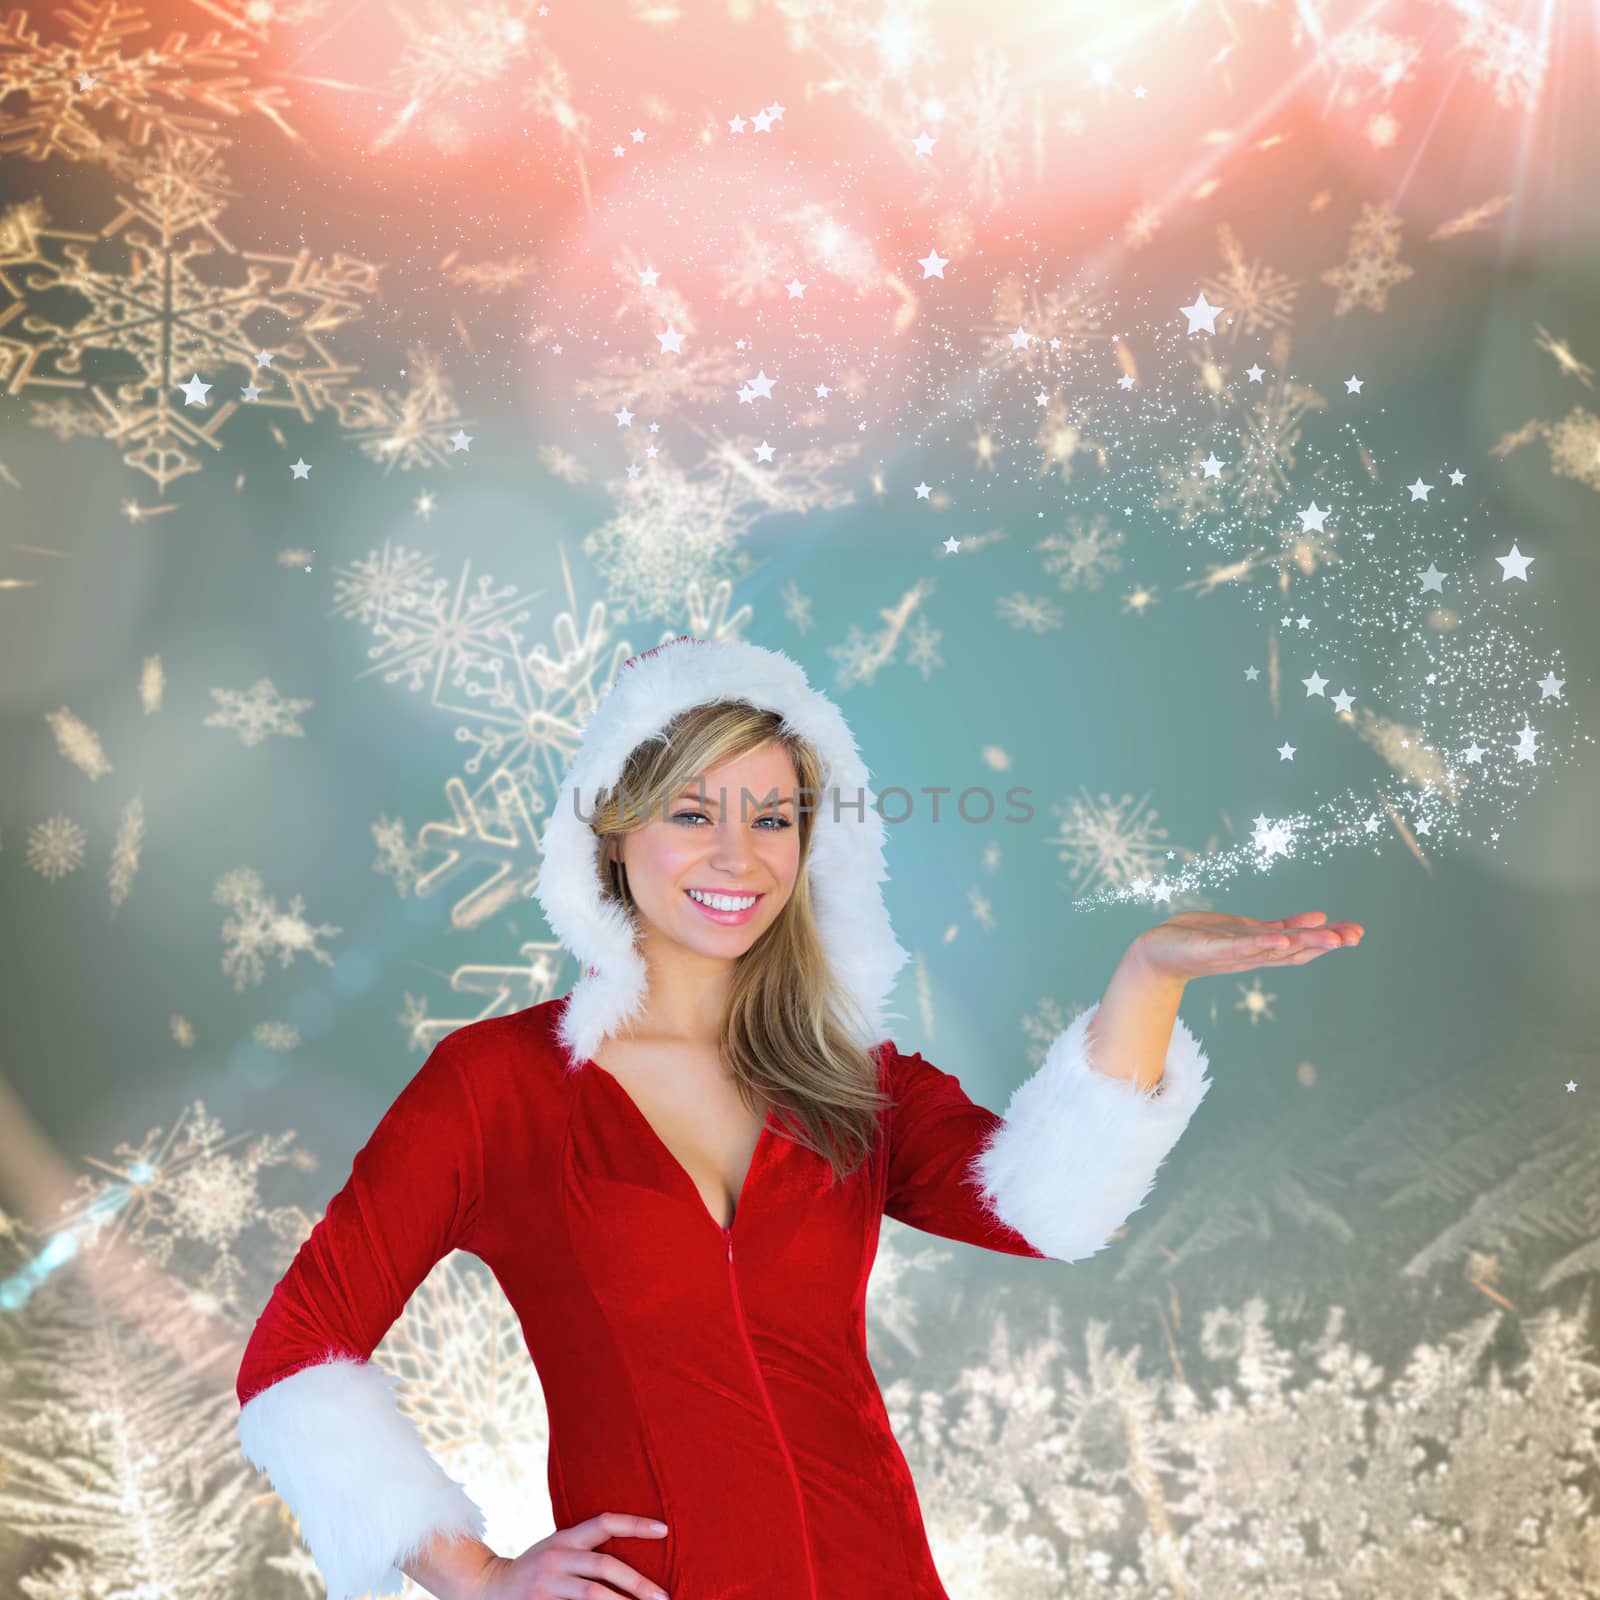 Pretty girl presenting in santa outfit against cream snow flake pattern design